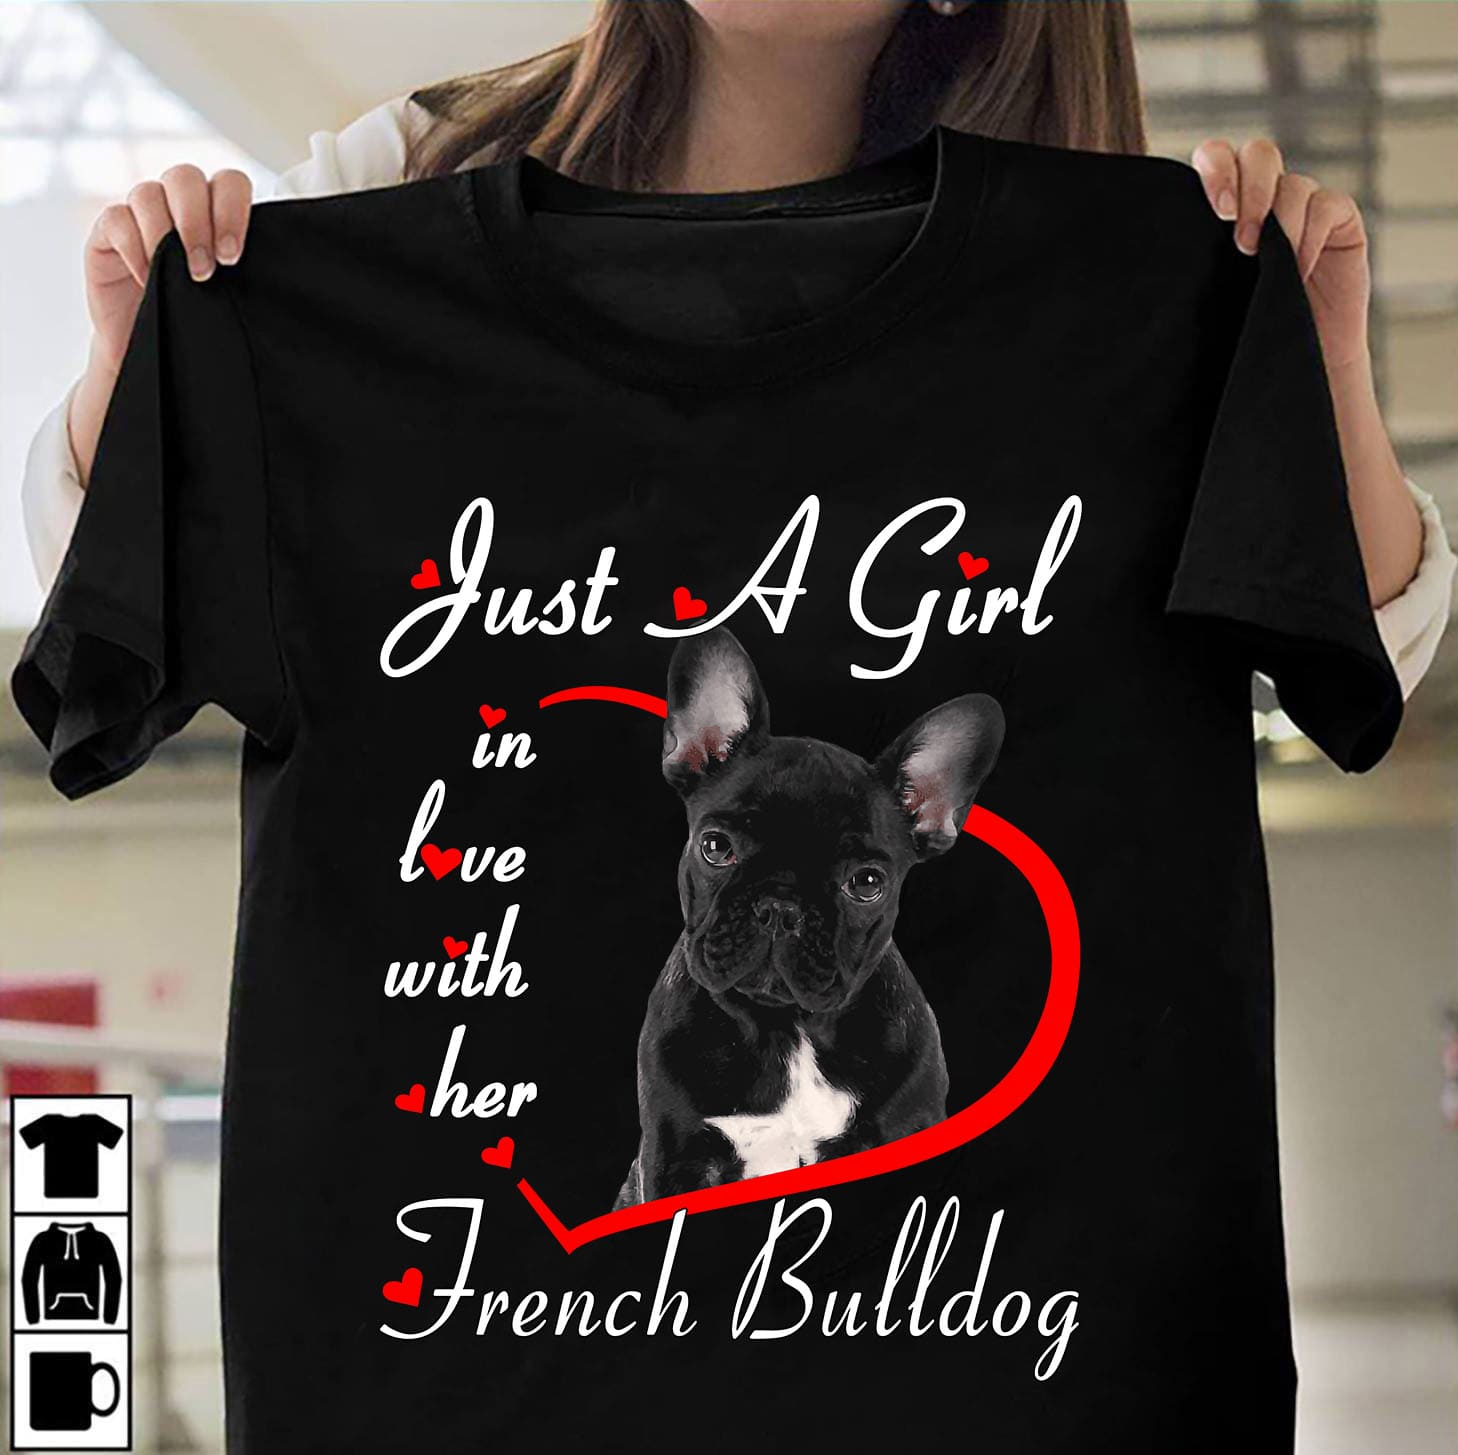 Just a girl in love with her French bulldog - Gift for dog lover, girl loves frenchie